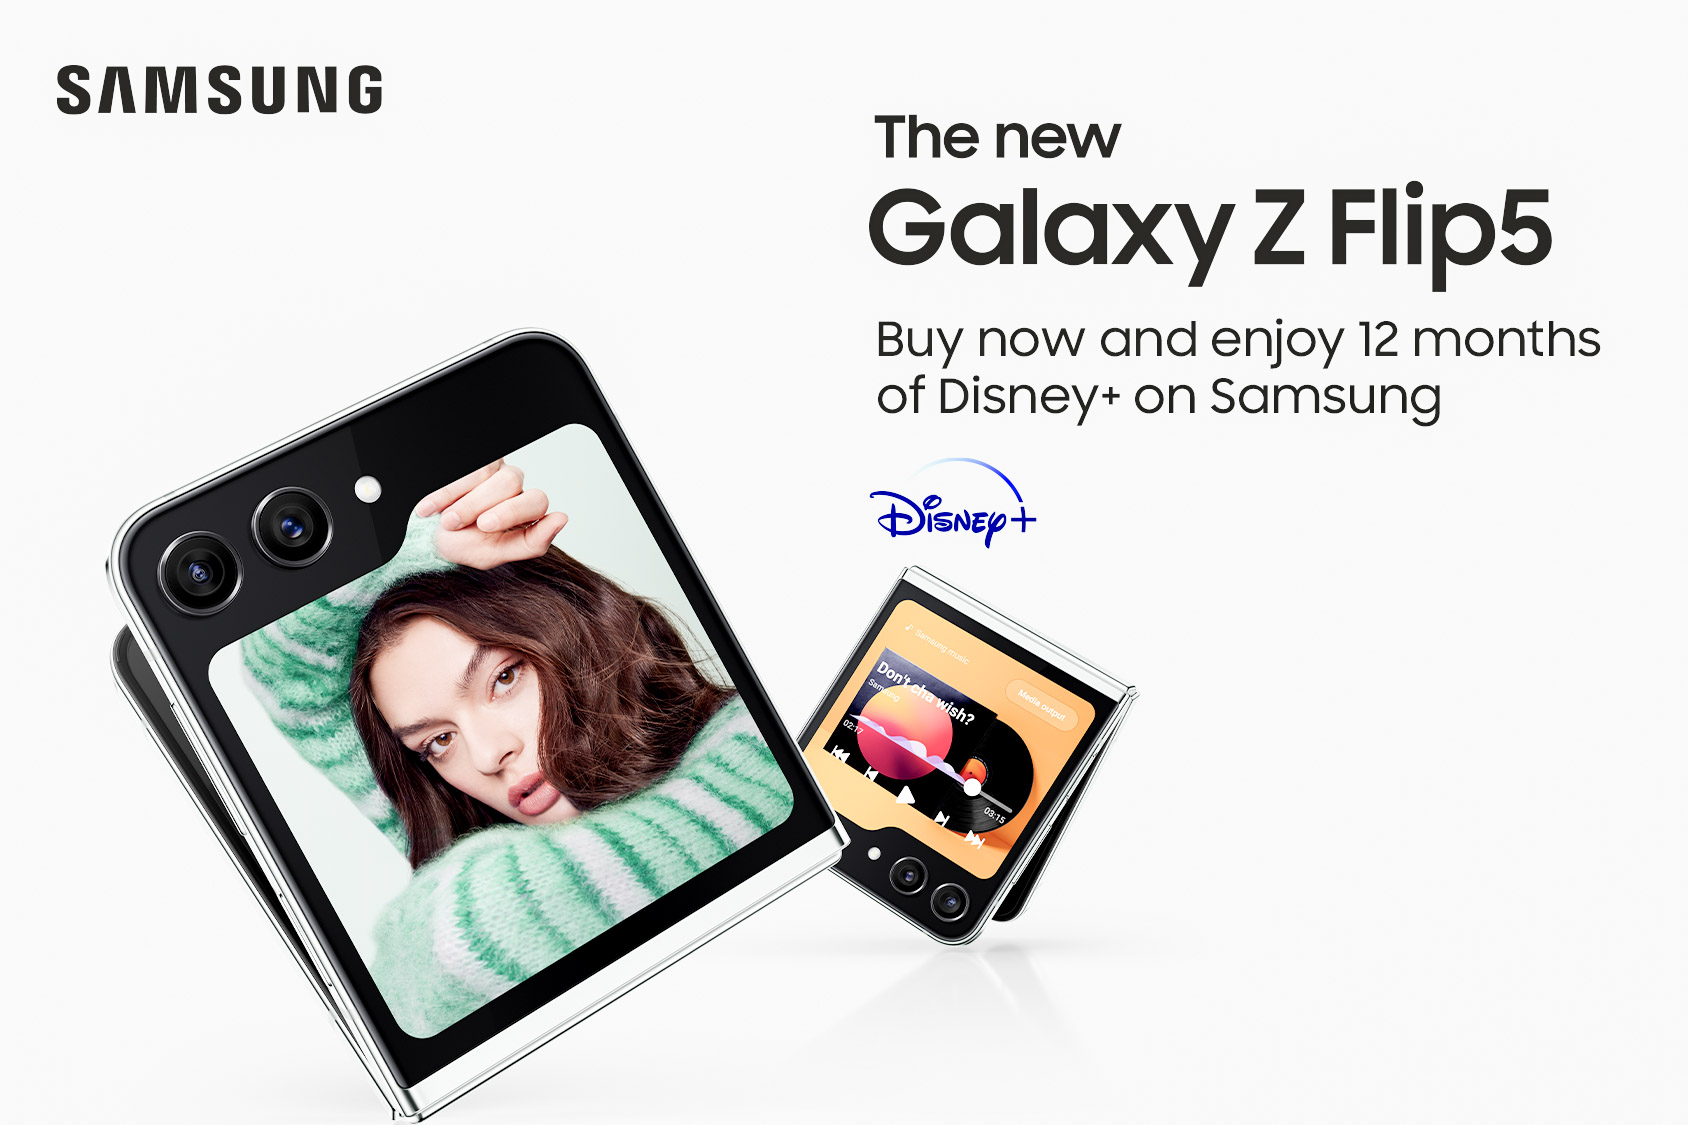 image promoting offer of 12 months of Disney+ for free when buying a Samsung Galaxy Z Flip 5 Android smartphones